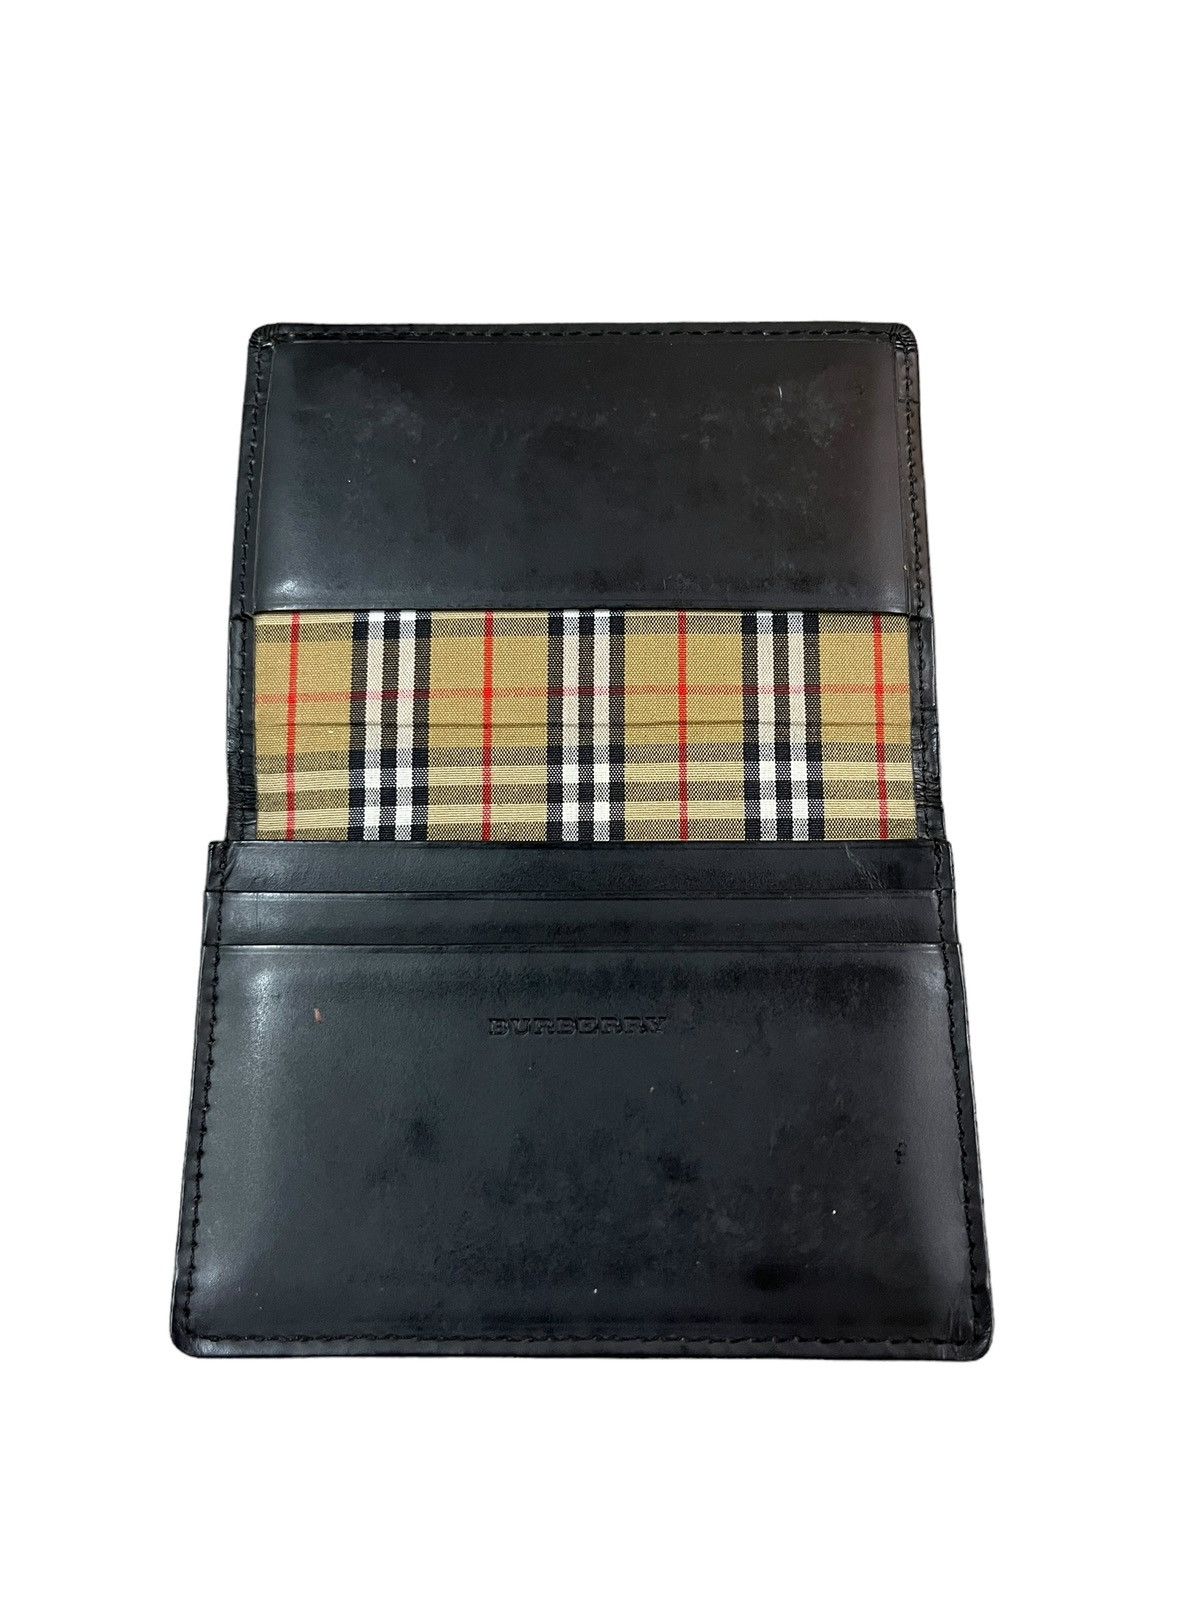 Burberry Leather Wallet Card Holder - 5